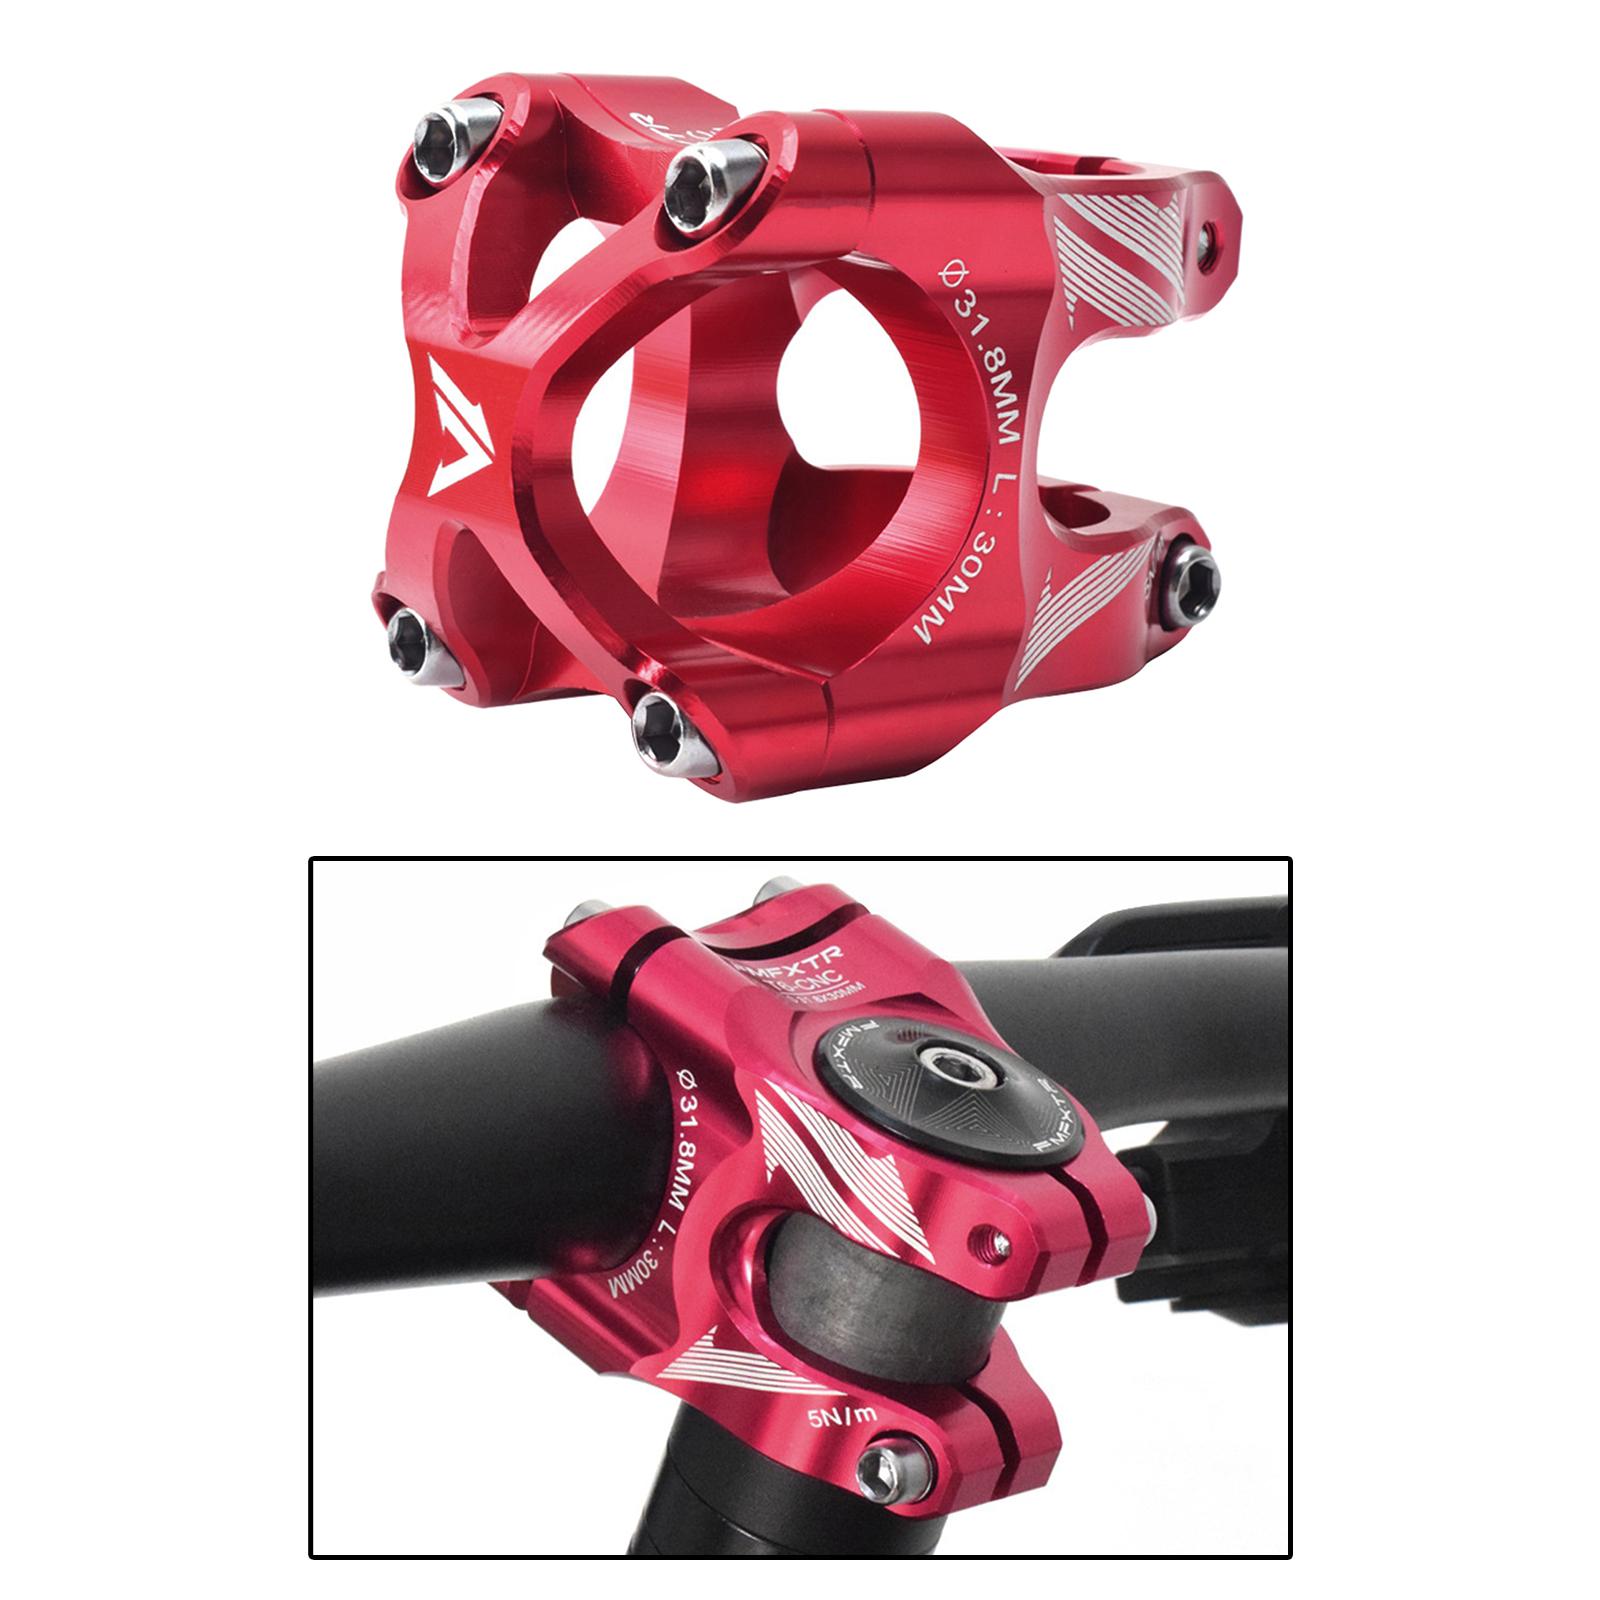 Premium 31.8mm Bike Stem Parts Handle Bar for Mountain Road Components red